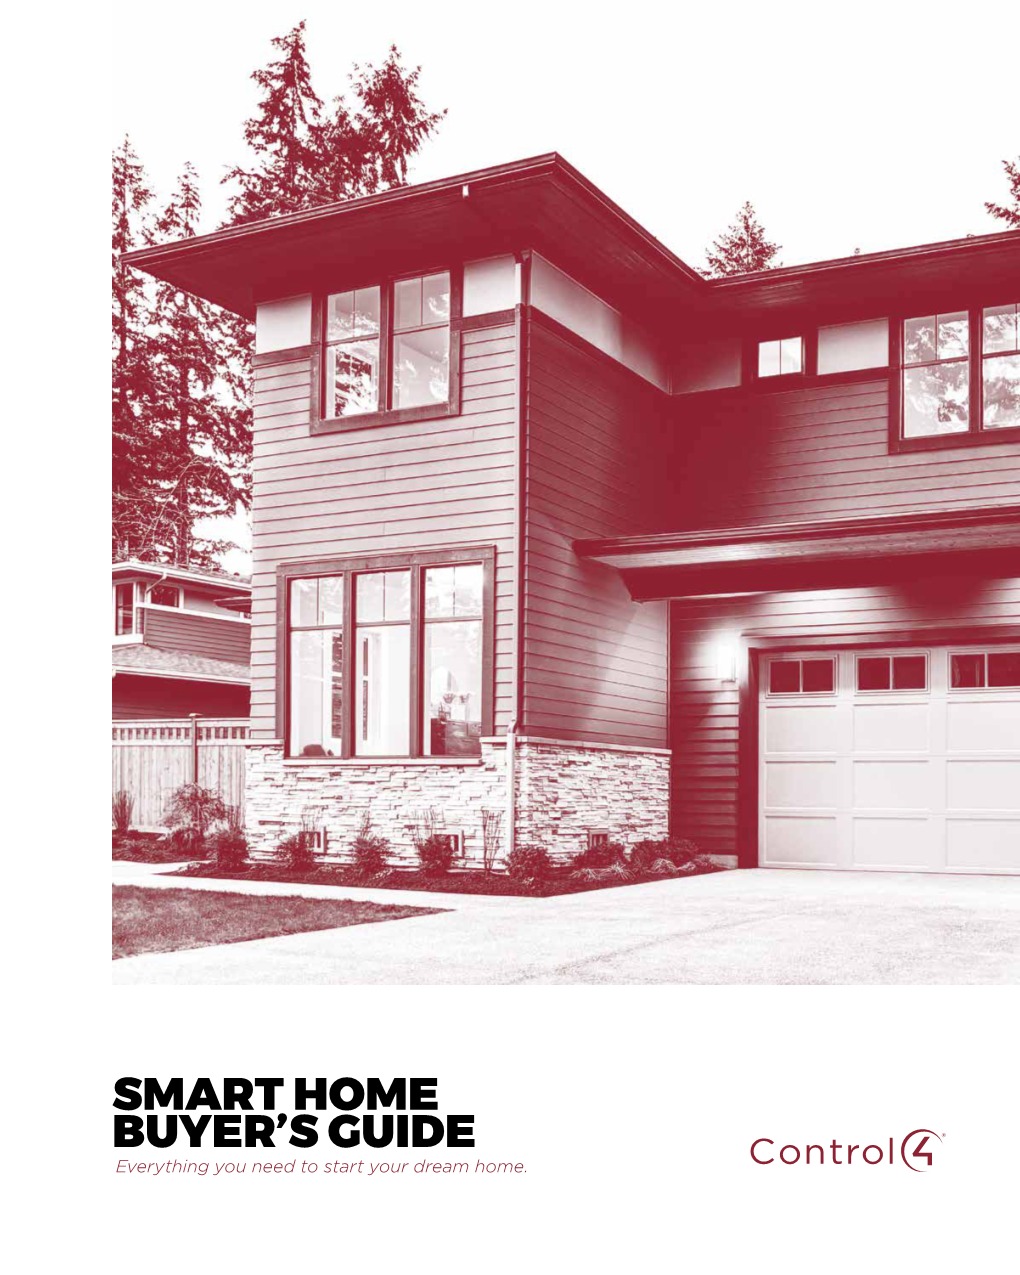 Smart Home Buyer's Guide